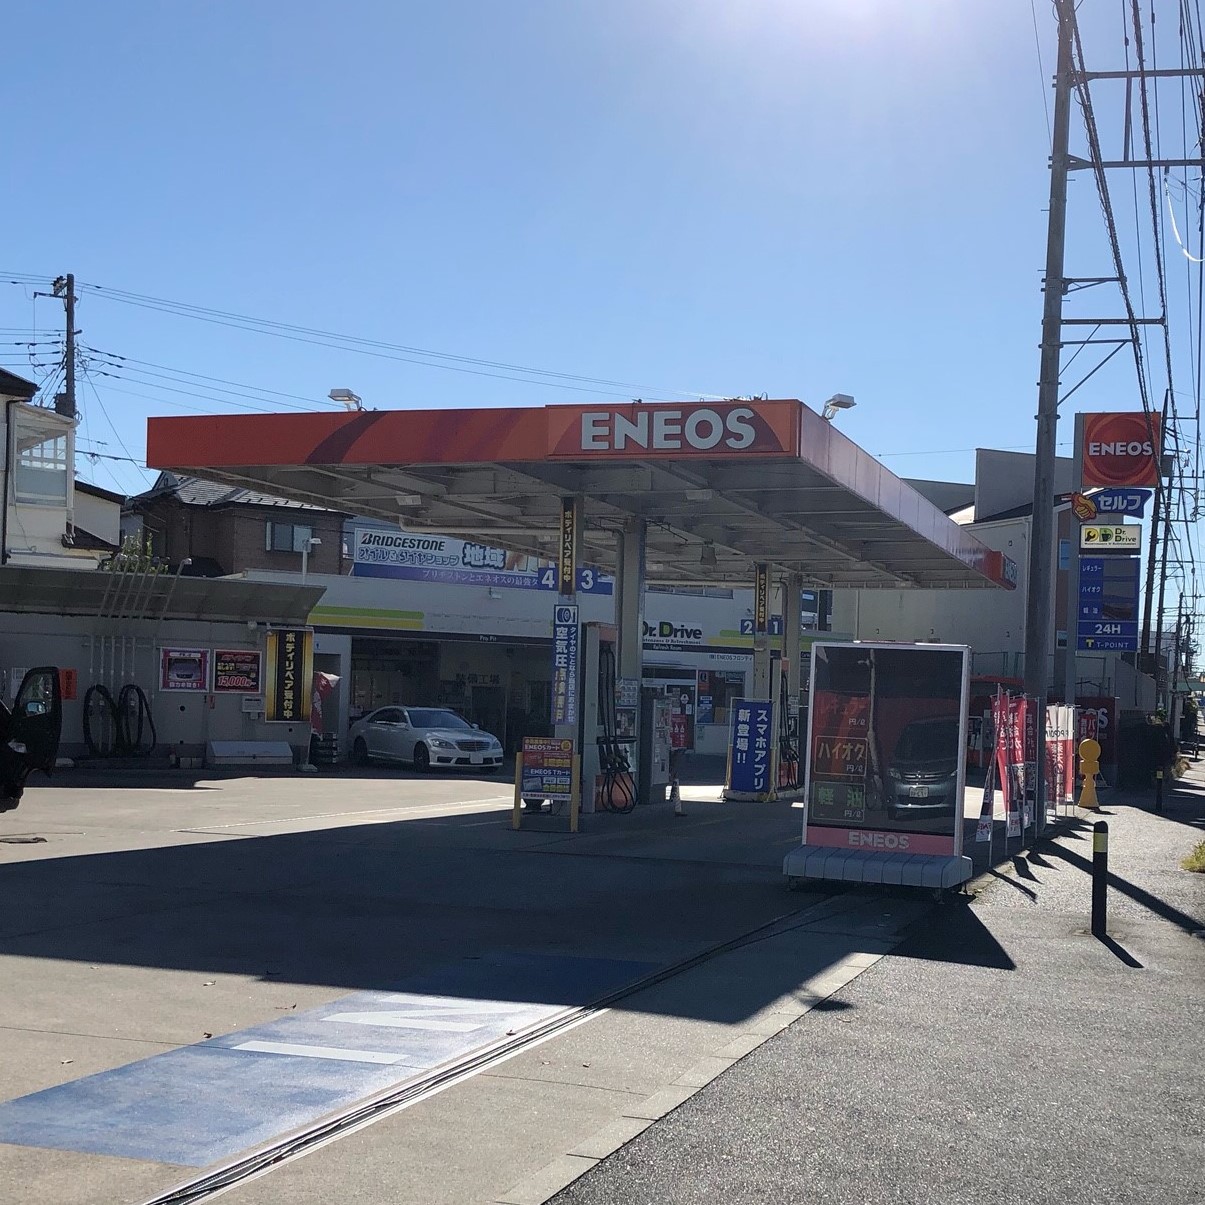 Images ENEOS Dr.Driveセルフ亀井野店(ENEOSフロンティア)